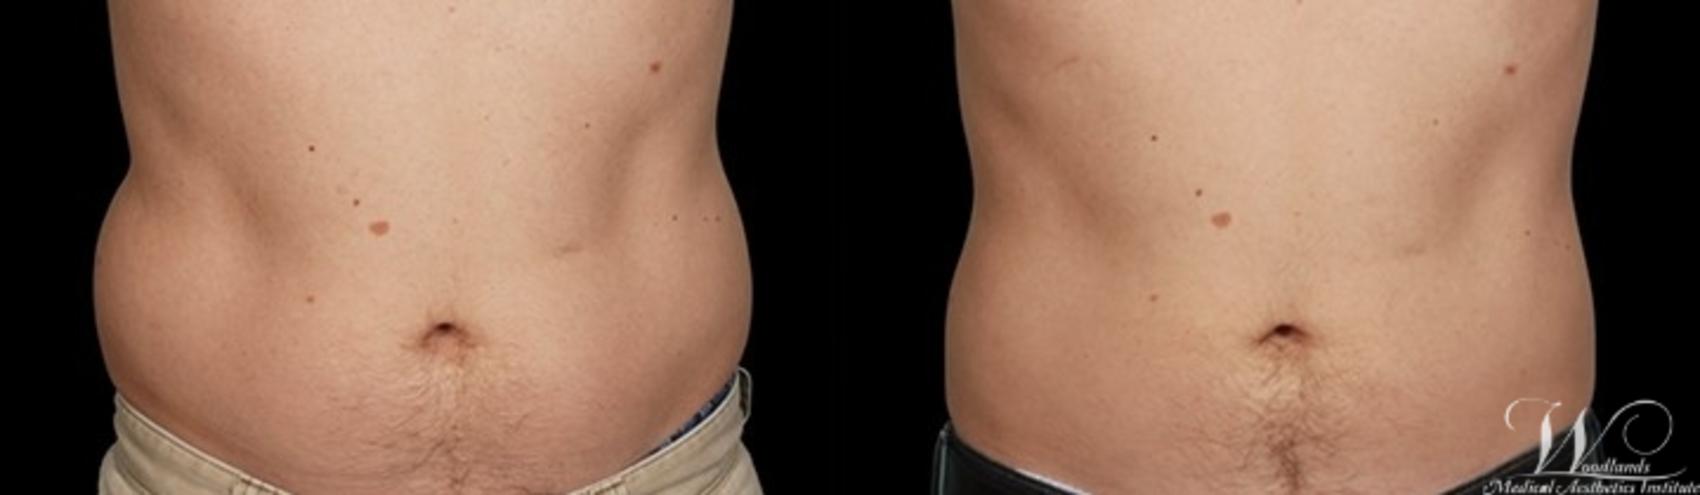 Before & After CoolSculpting® Case 7 Front View in The Woodlands, TX